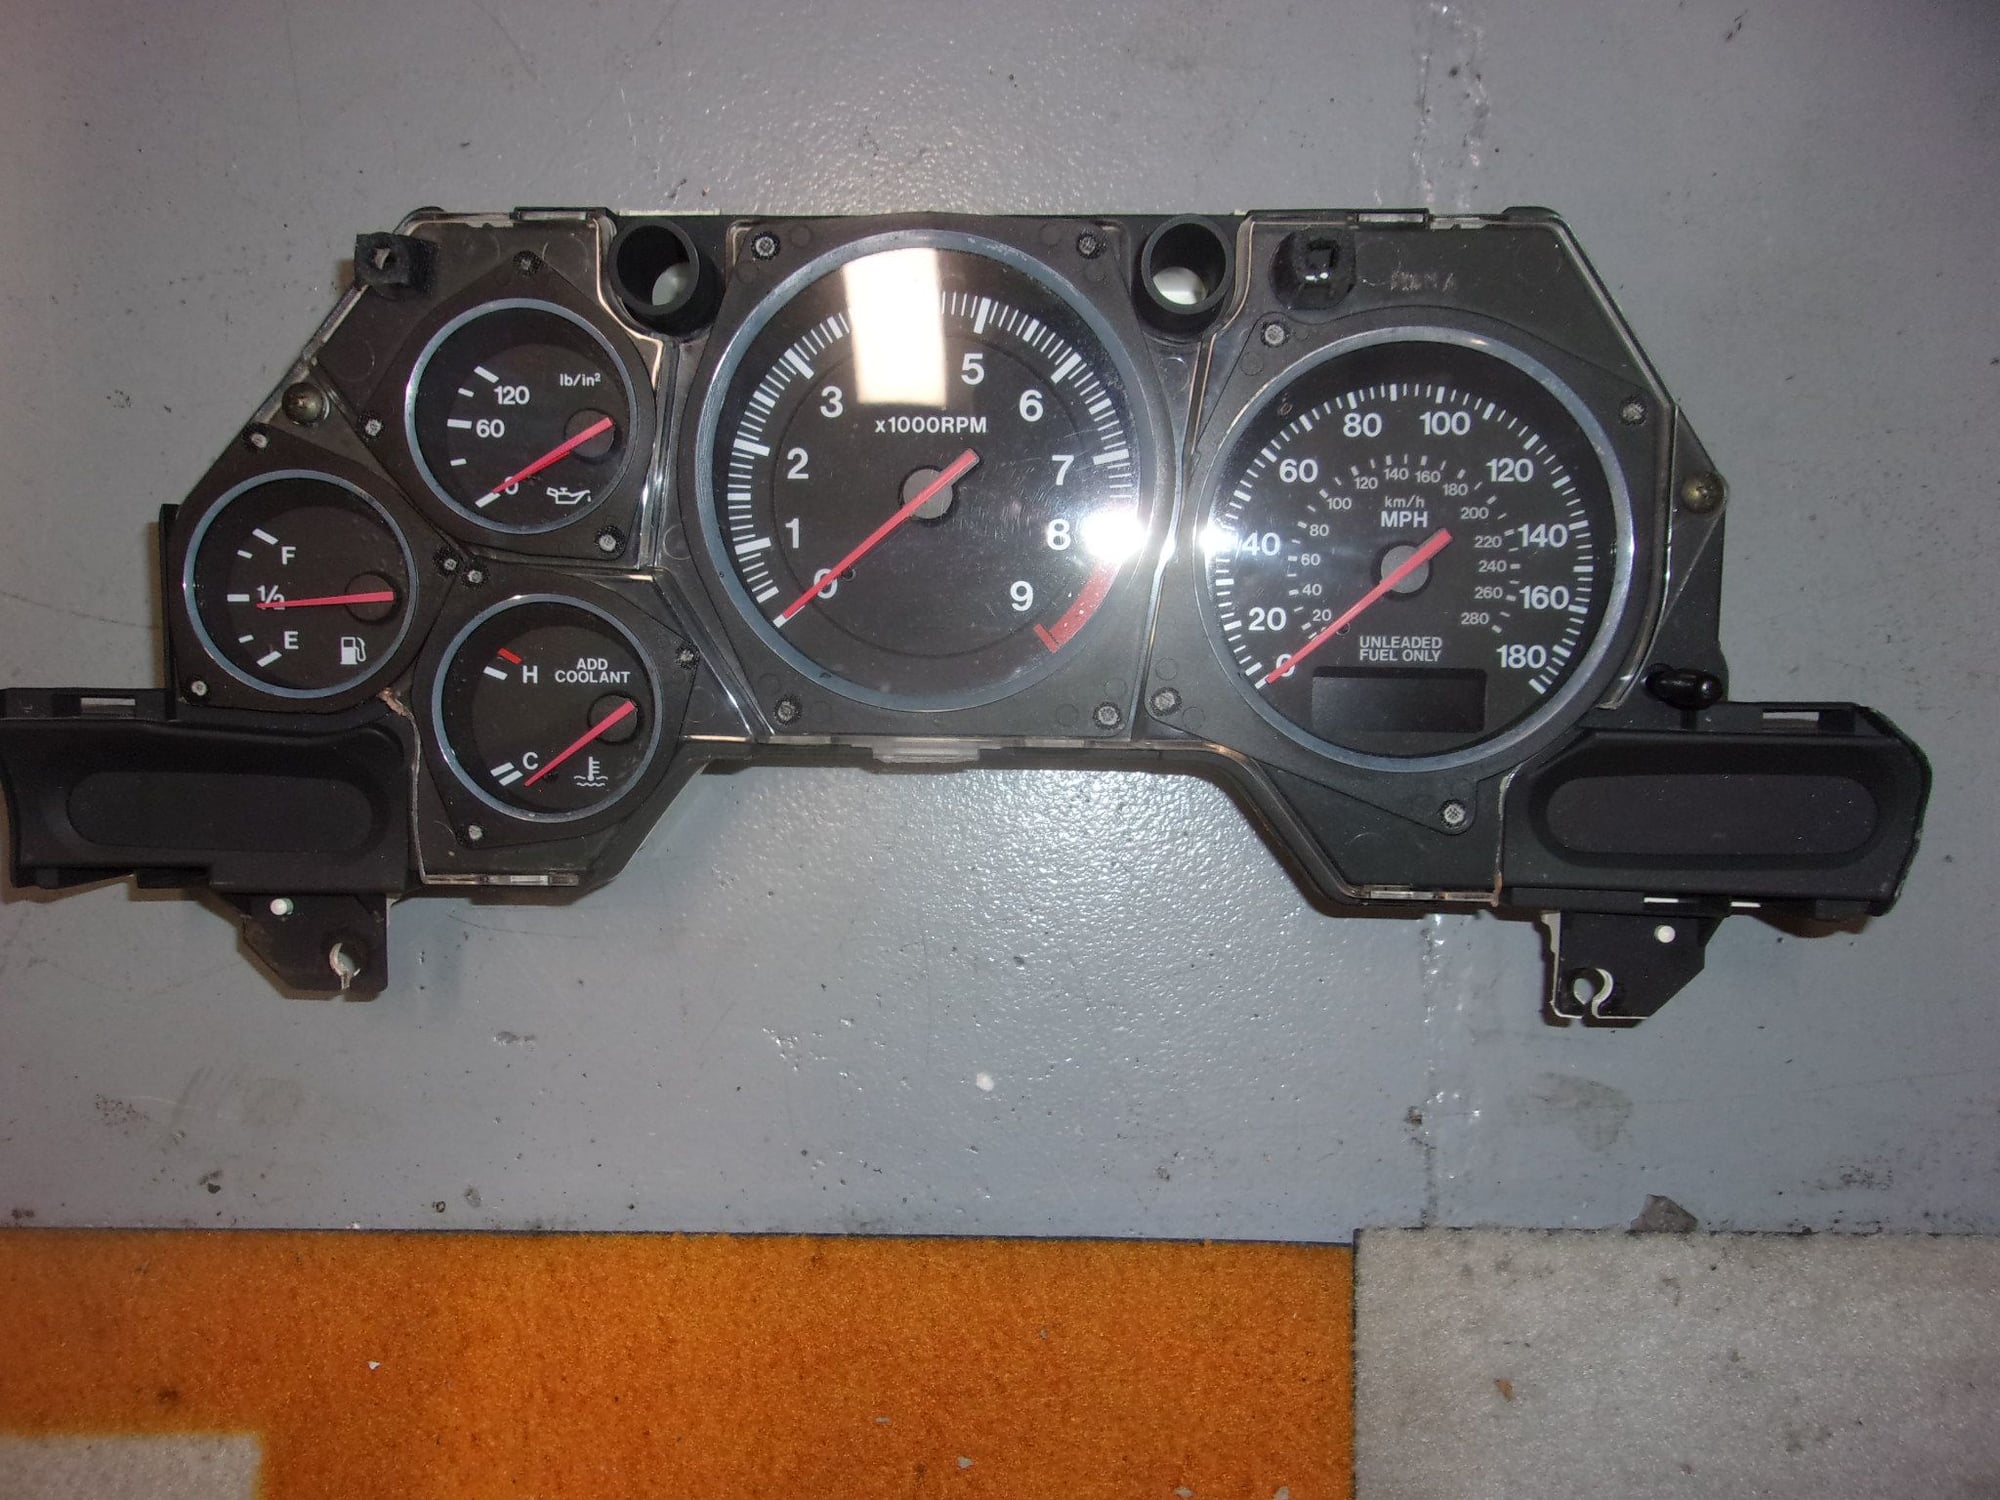 Interior/Upholstery - '93 Gauge Cluster - Used - 1993 to 1995 Mazda RX-7 - Murfreesboro, TN 37130, United States